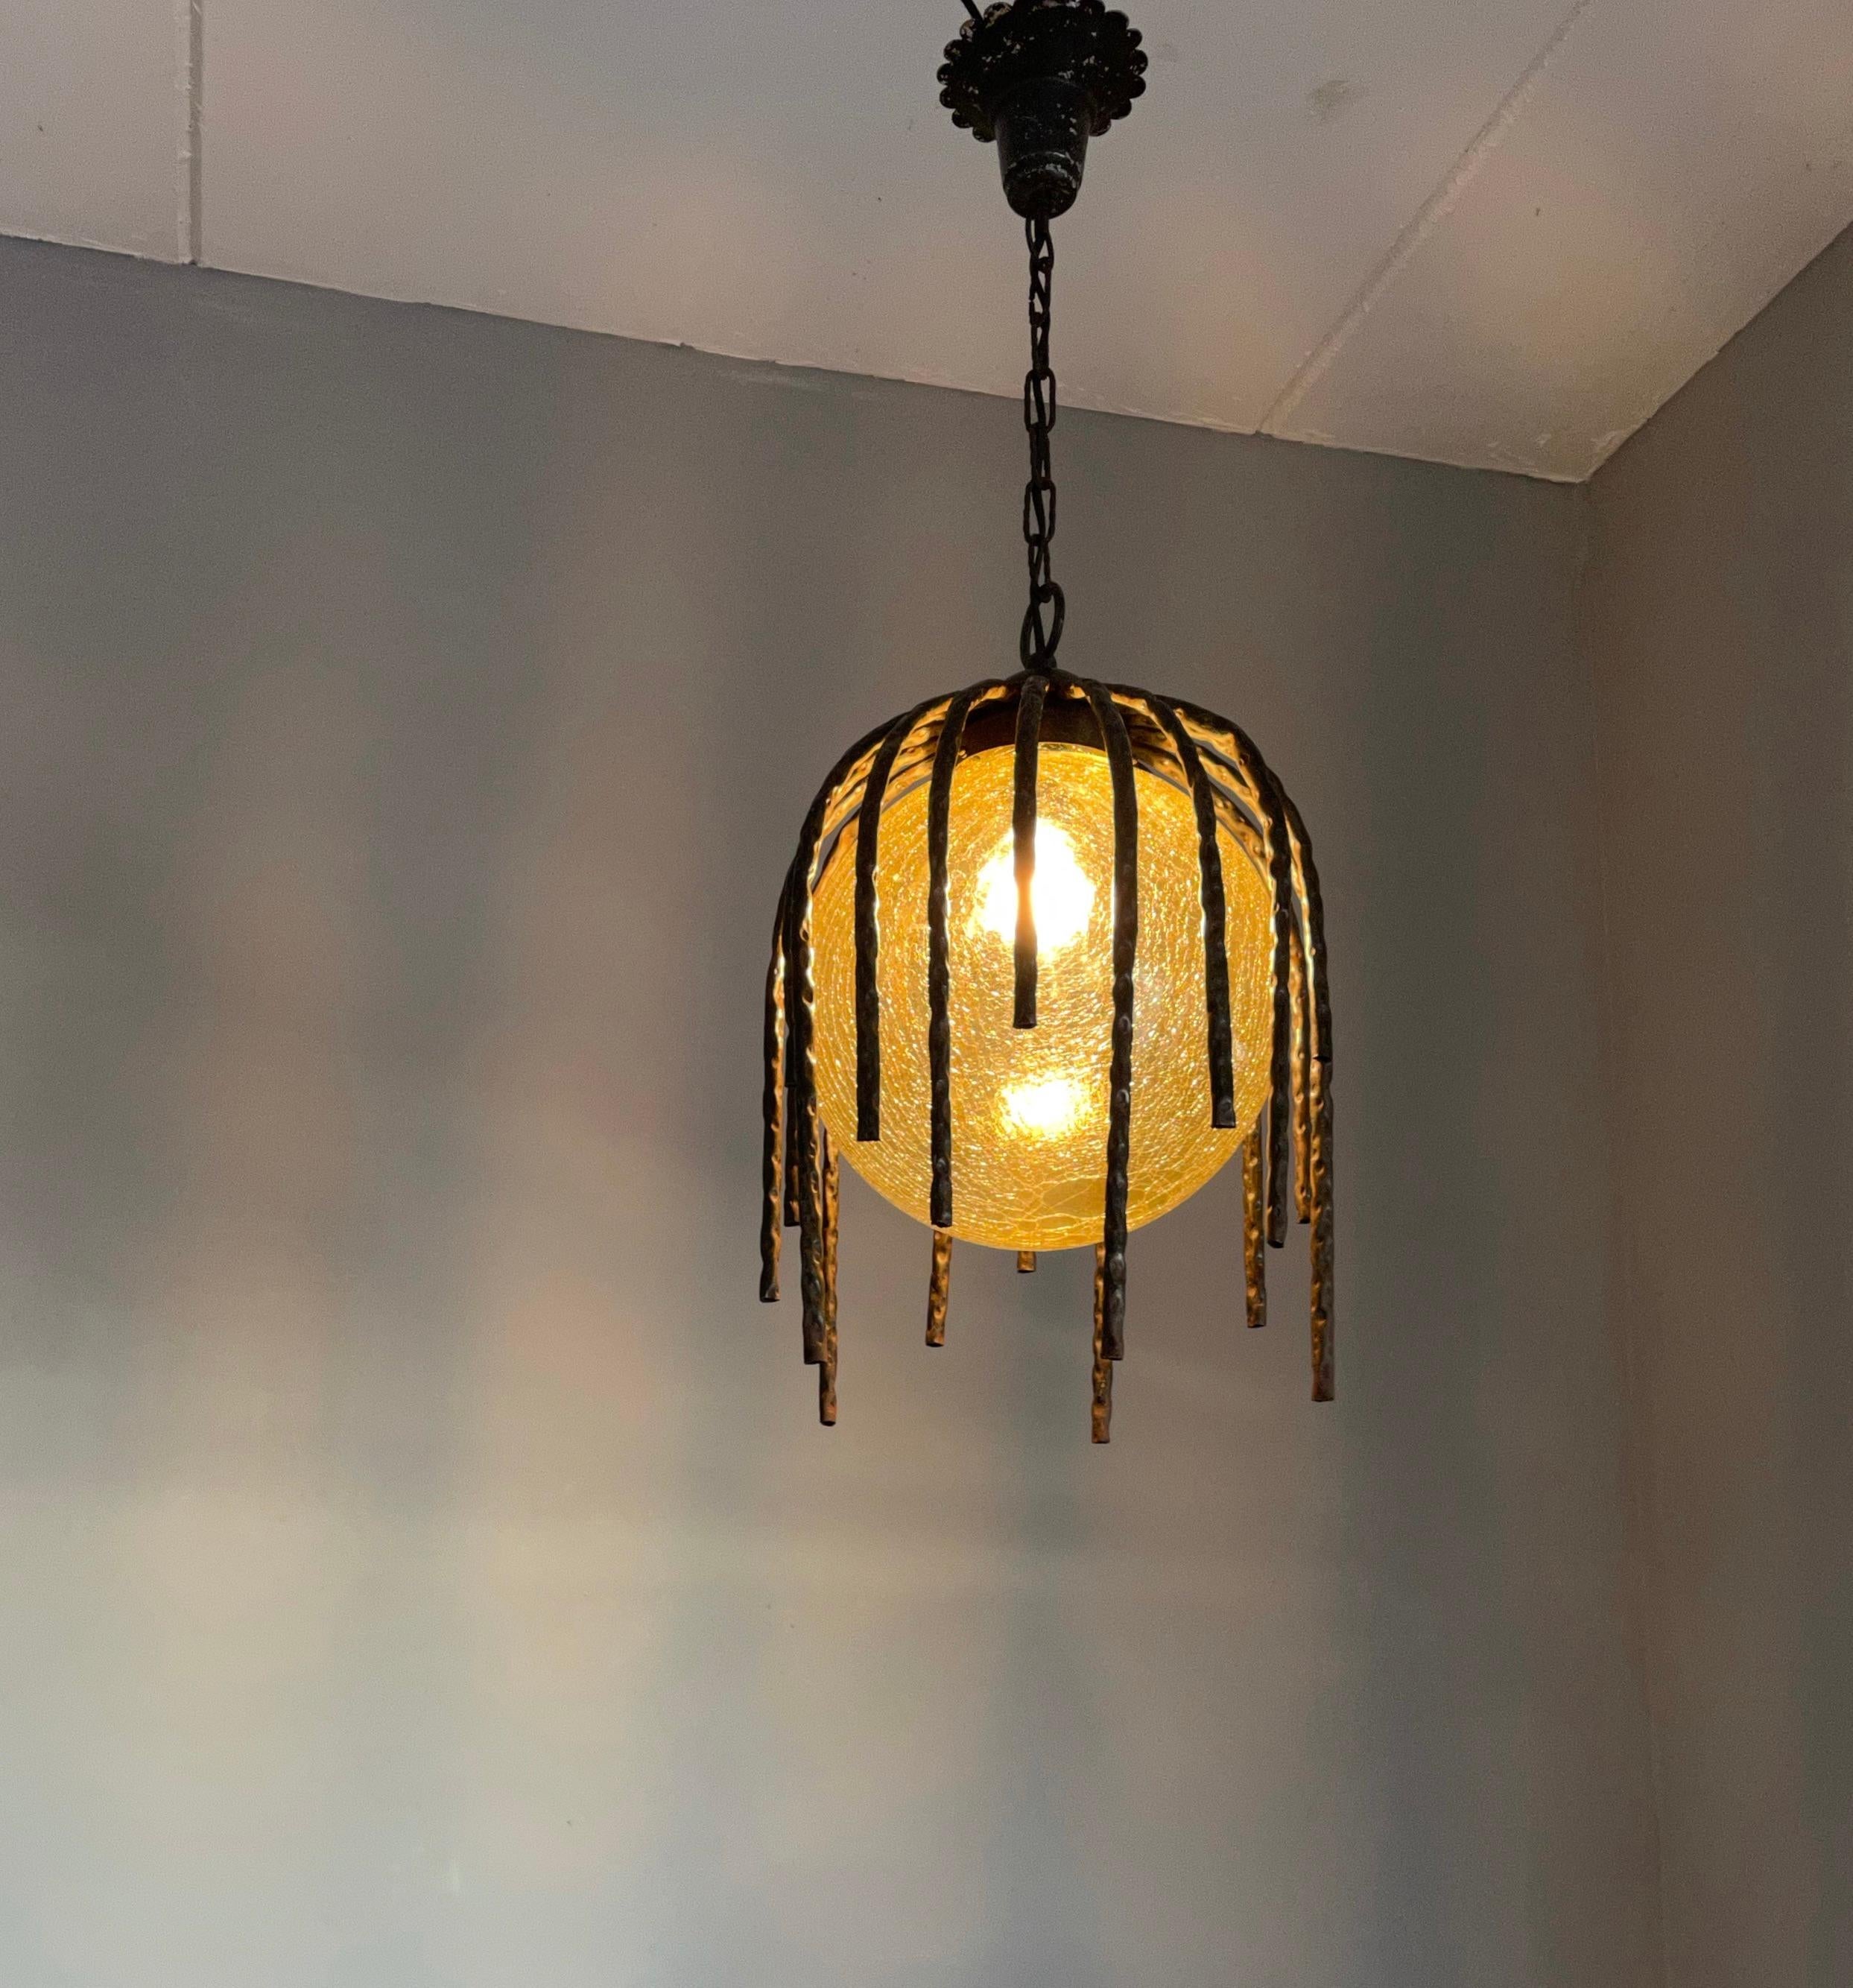 Organically design wrought iron and glass light fixture from the mid-century era.

This fine quality workmanship pendant from mid-20th century is another one of our recent great finds. With 20th century lighting being one of our specialties we are